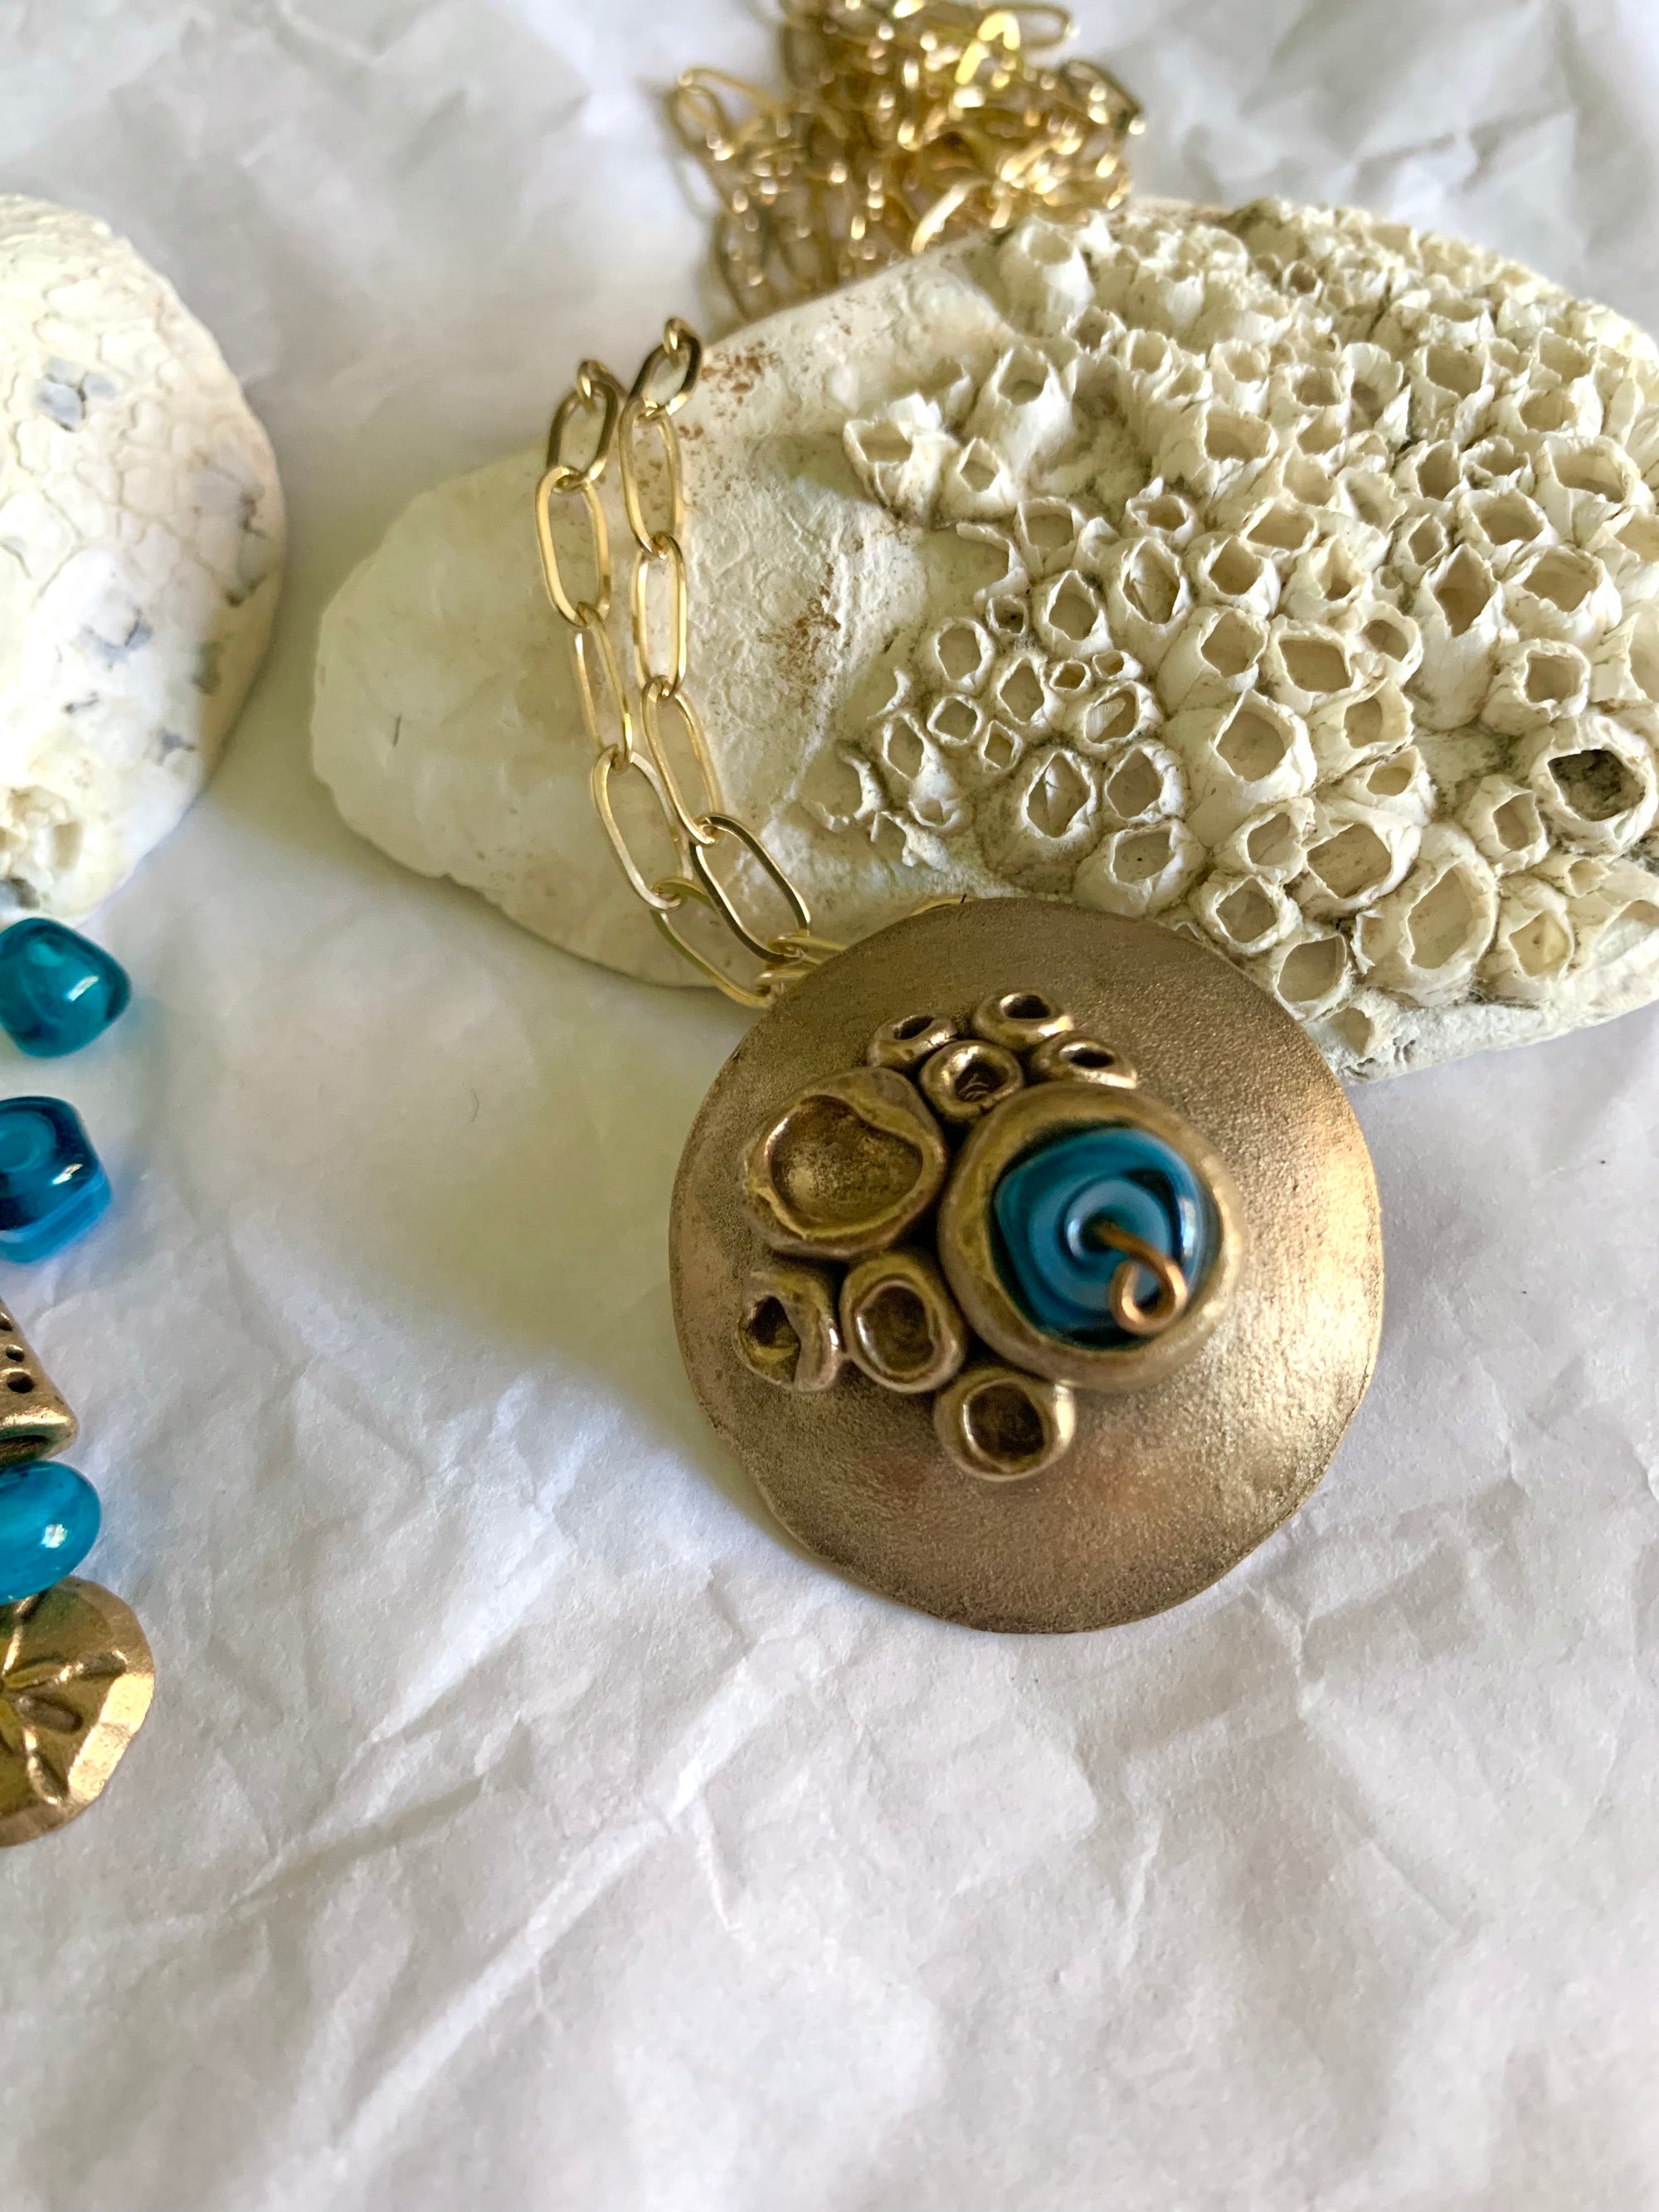 Barnacle inspired art jewelry necklace